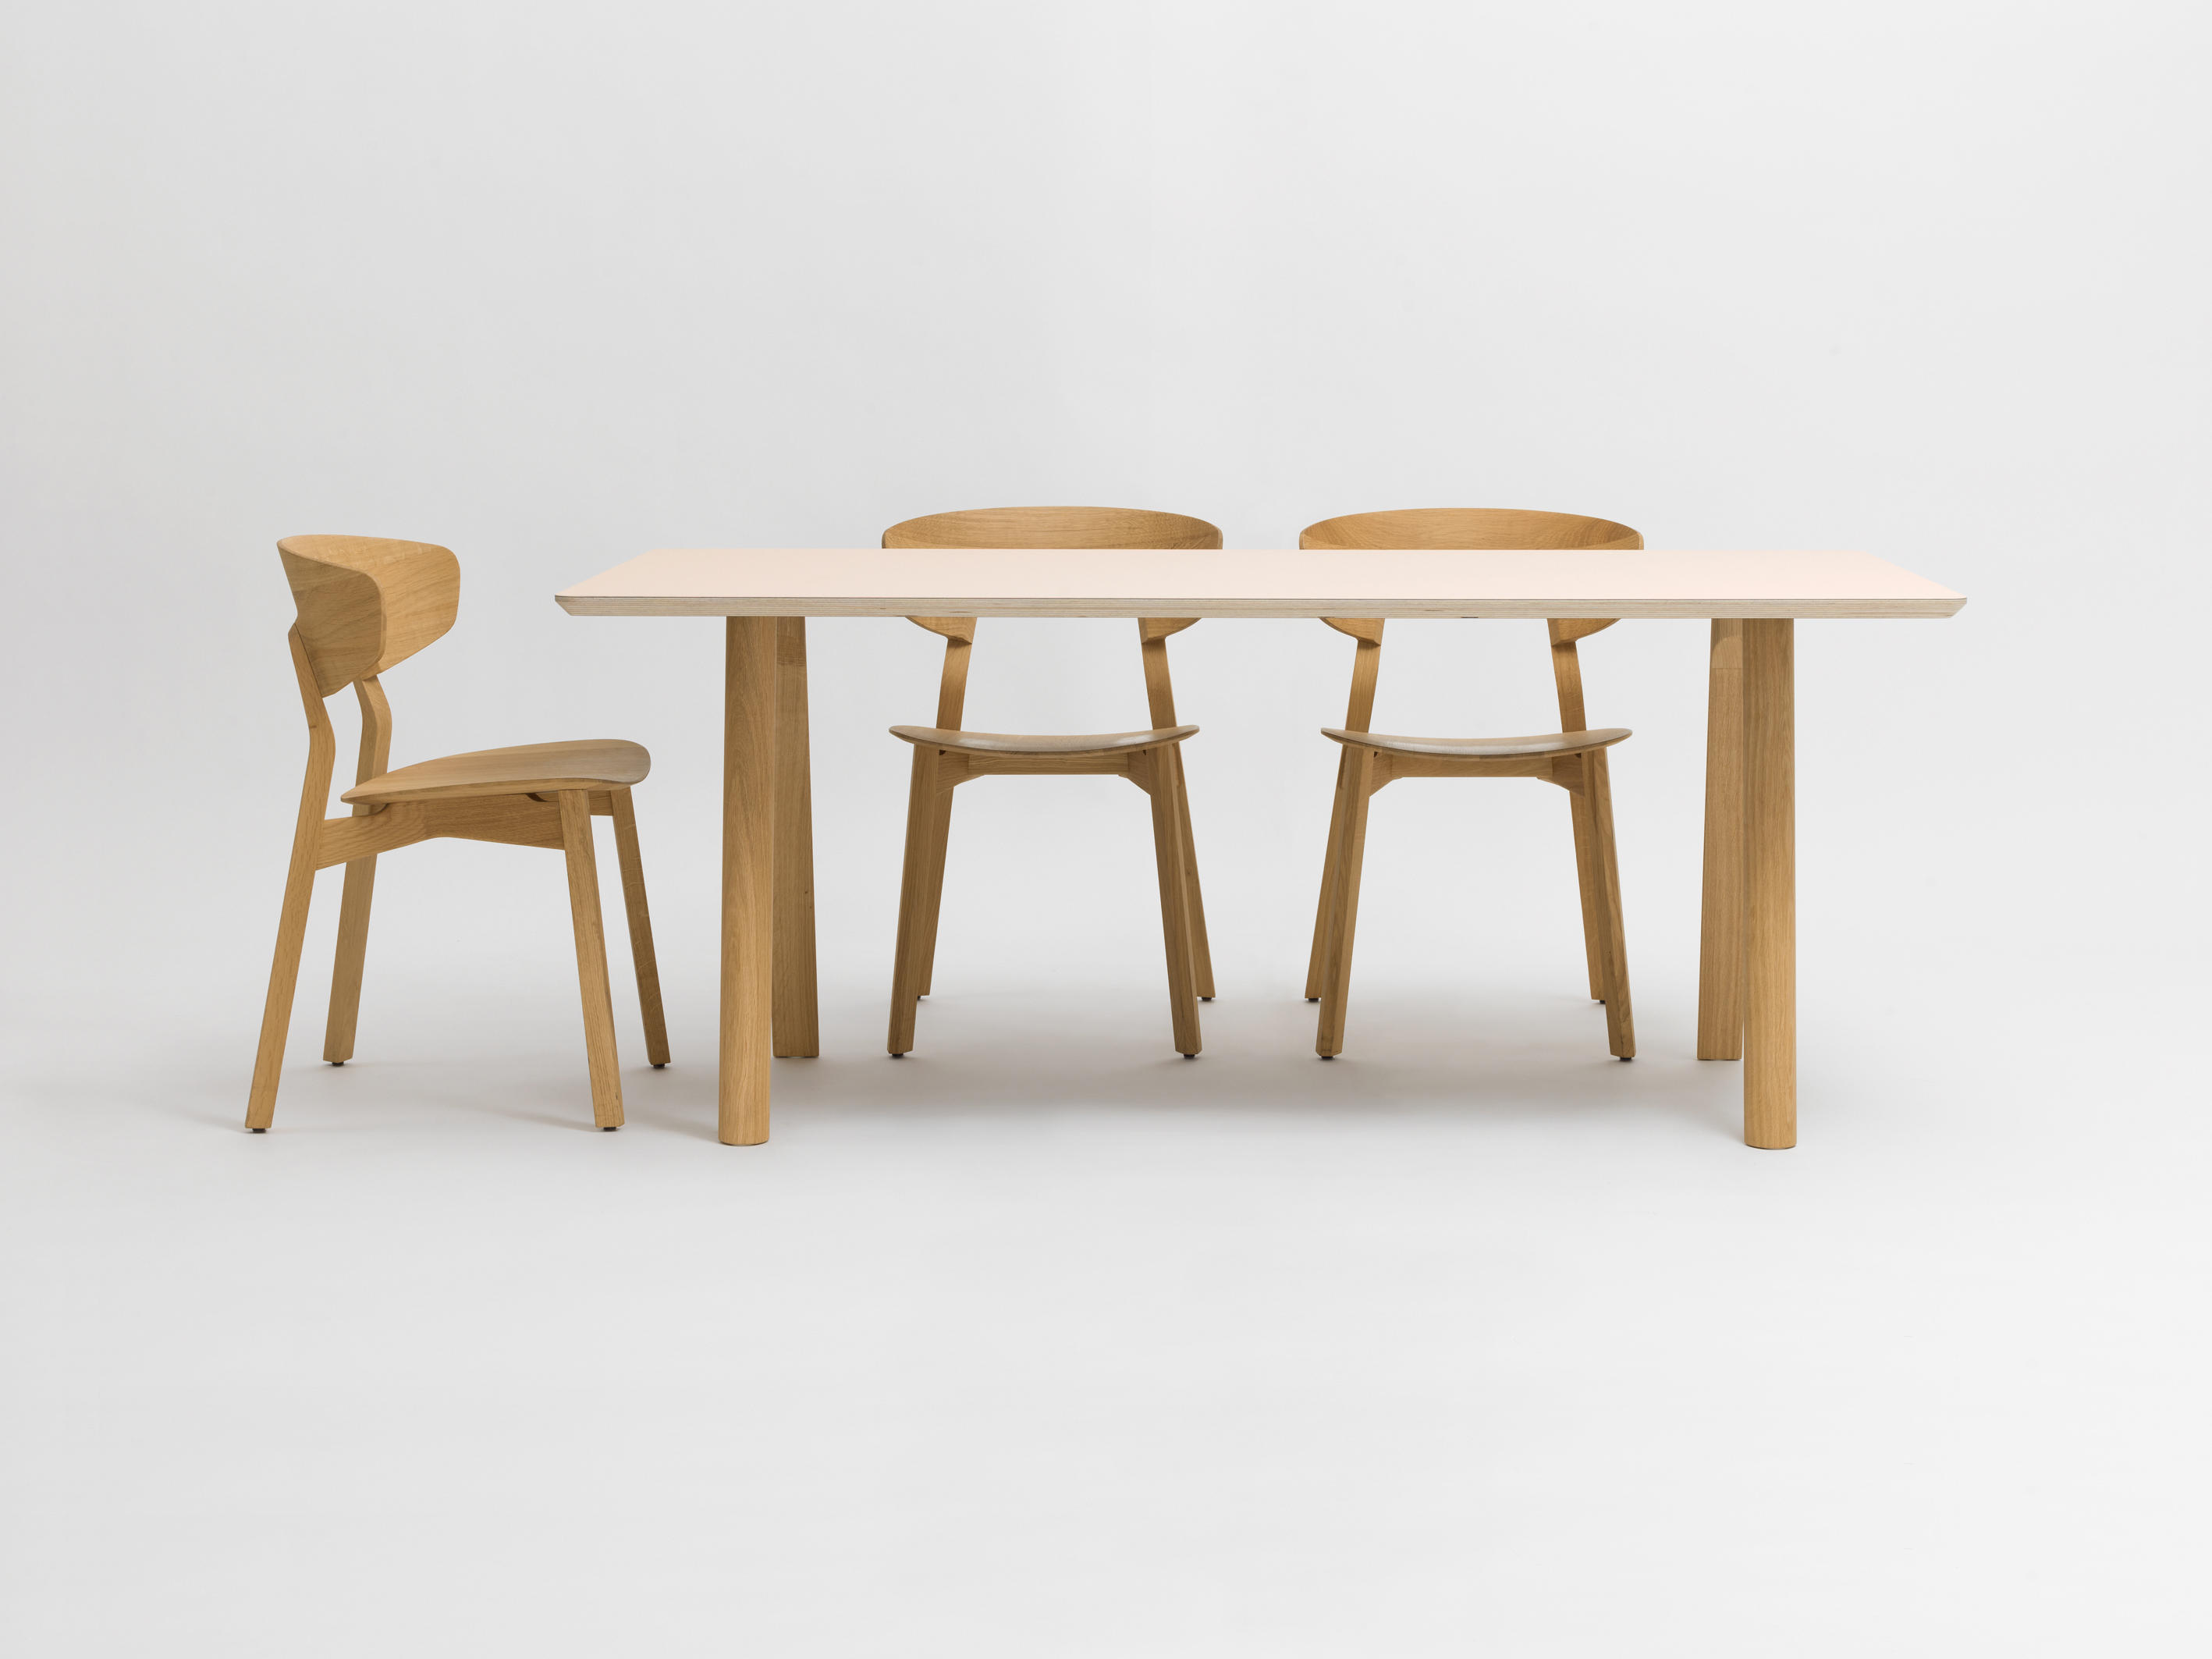 RAIL Solo Dining Table by Zeitraum